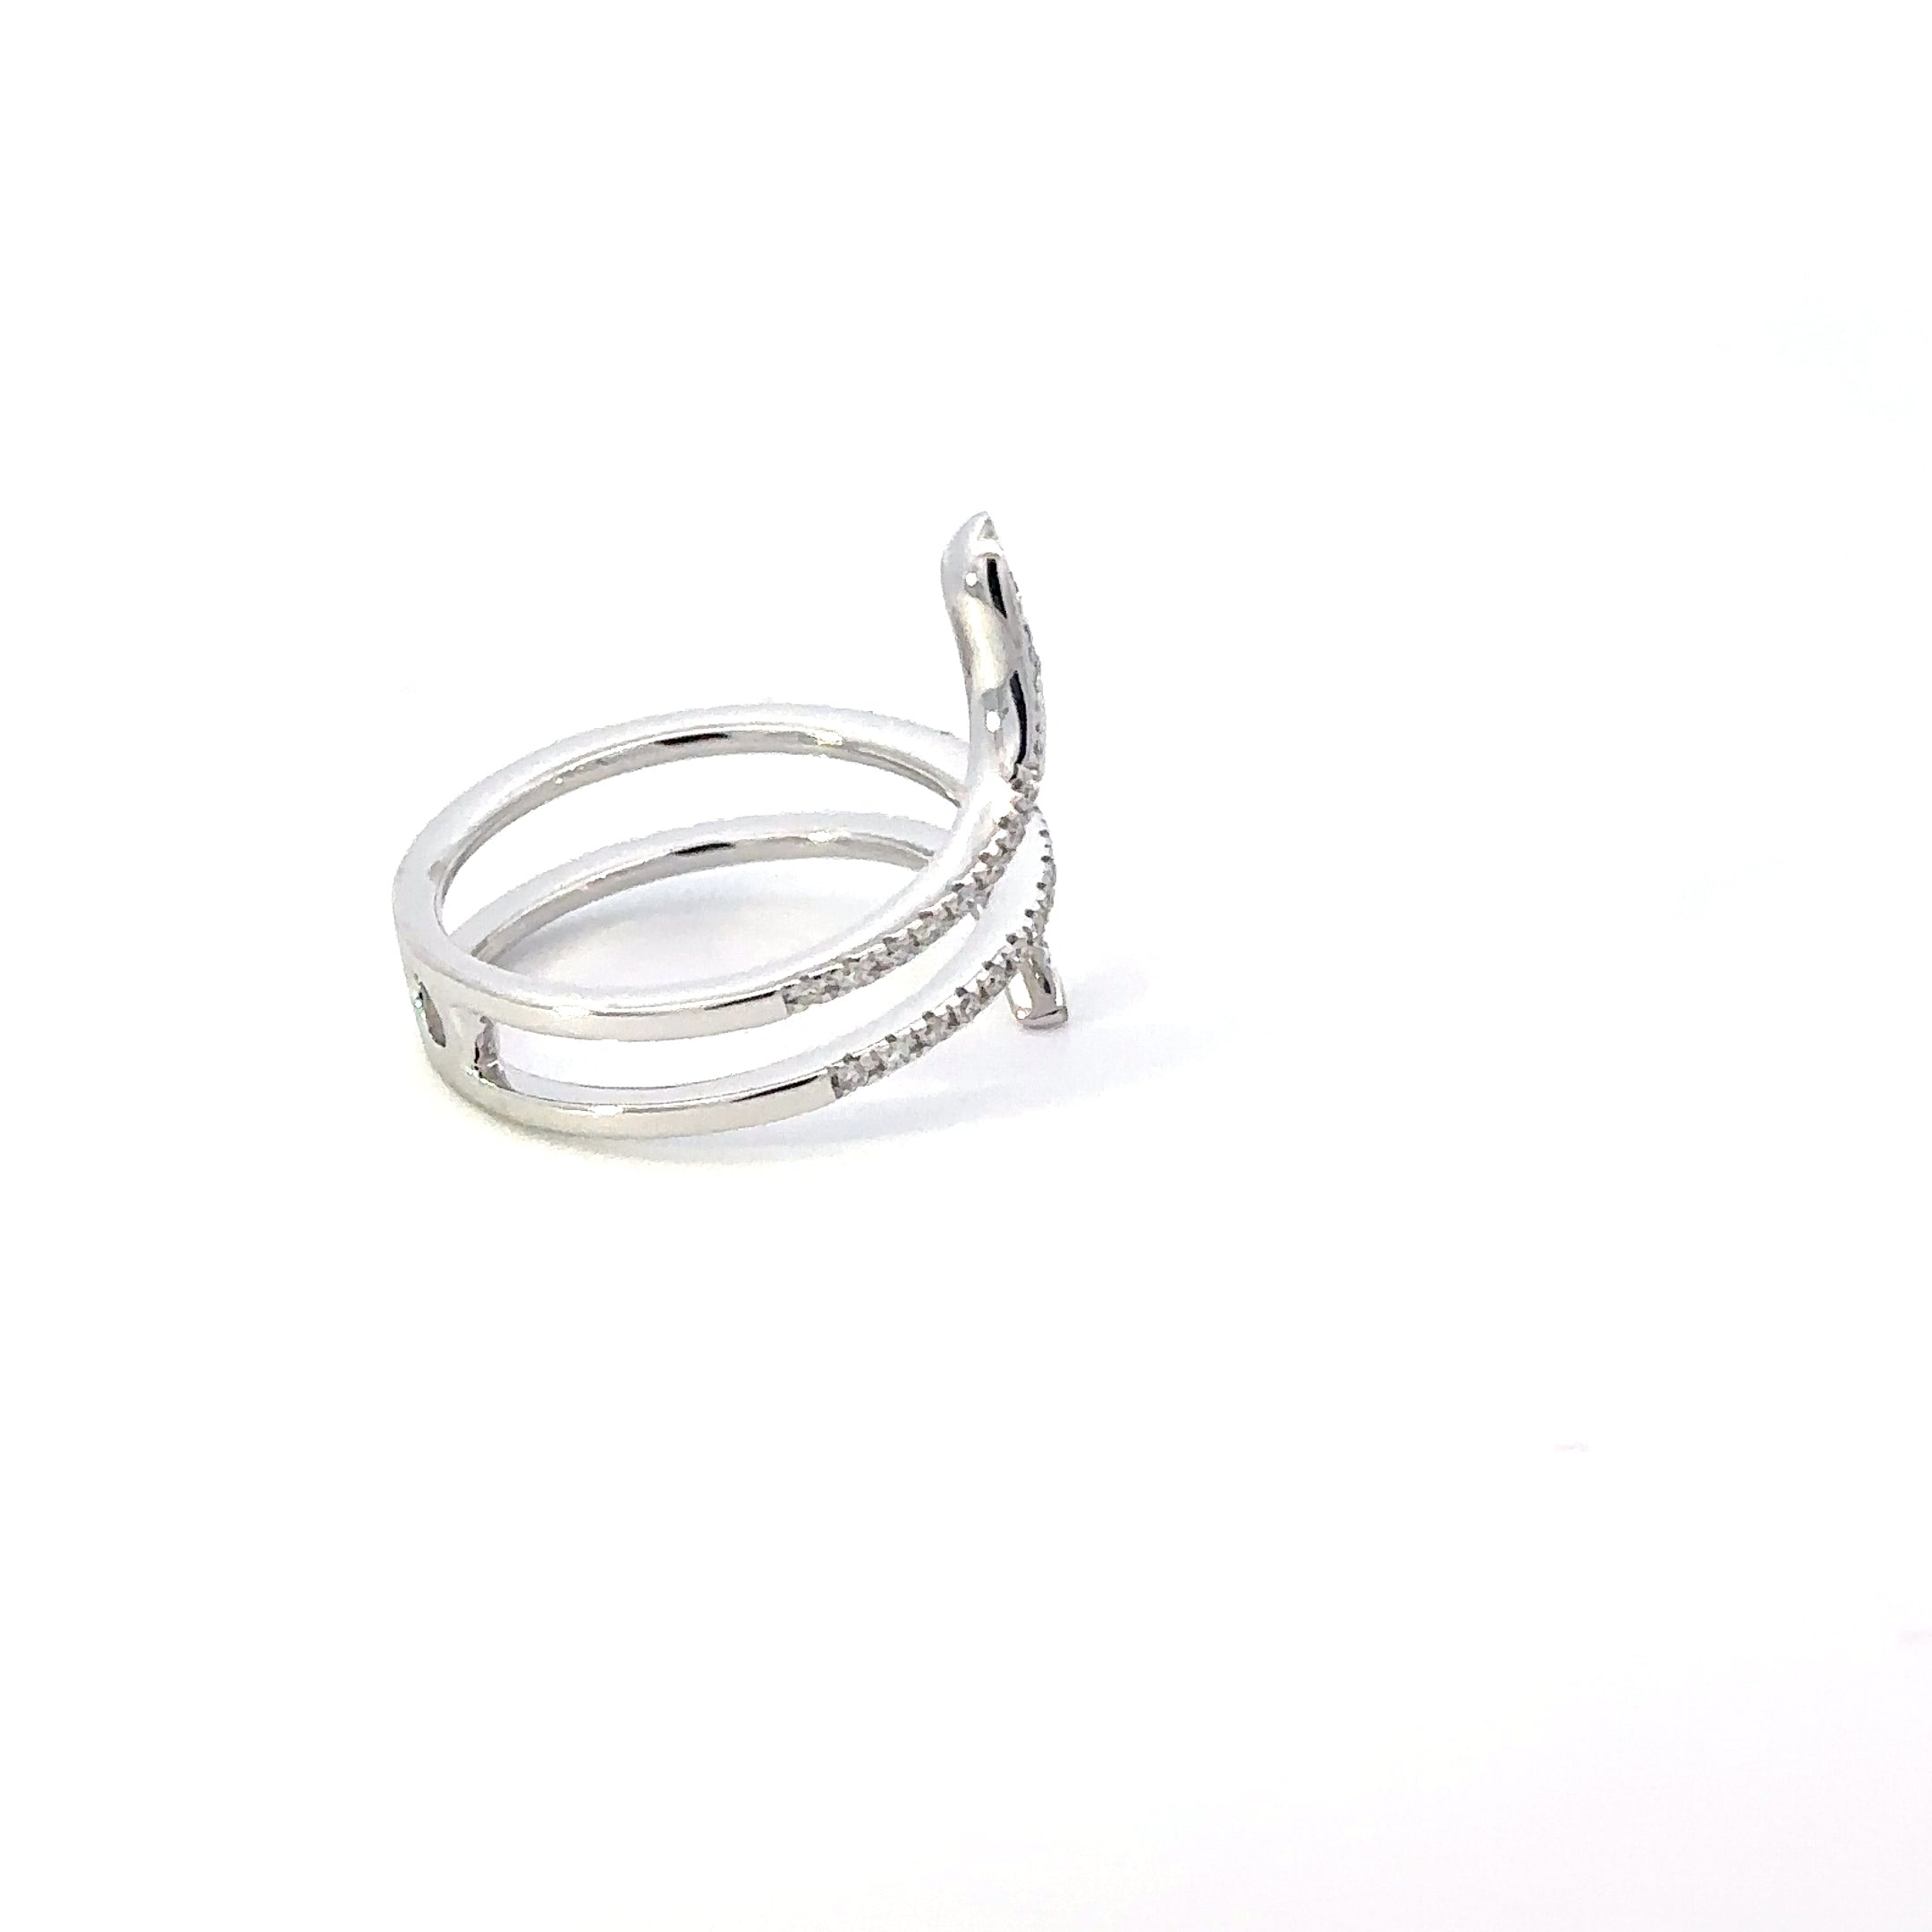 Coiled Snake Ring: 18K White Gold with Diamonds